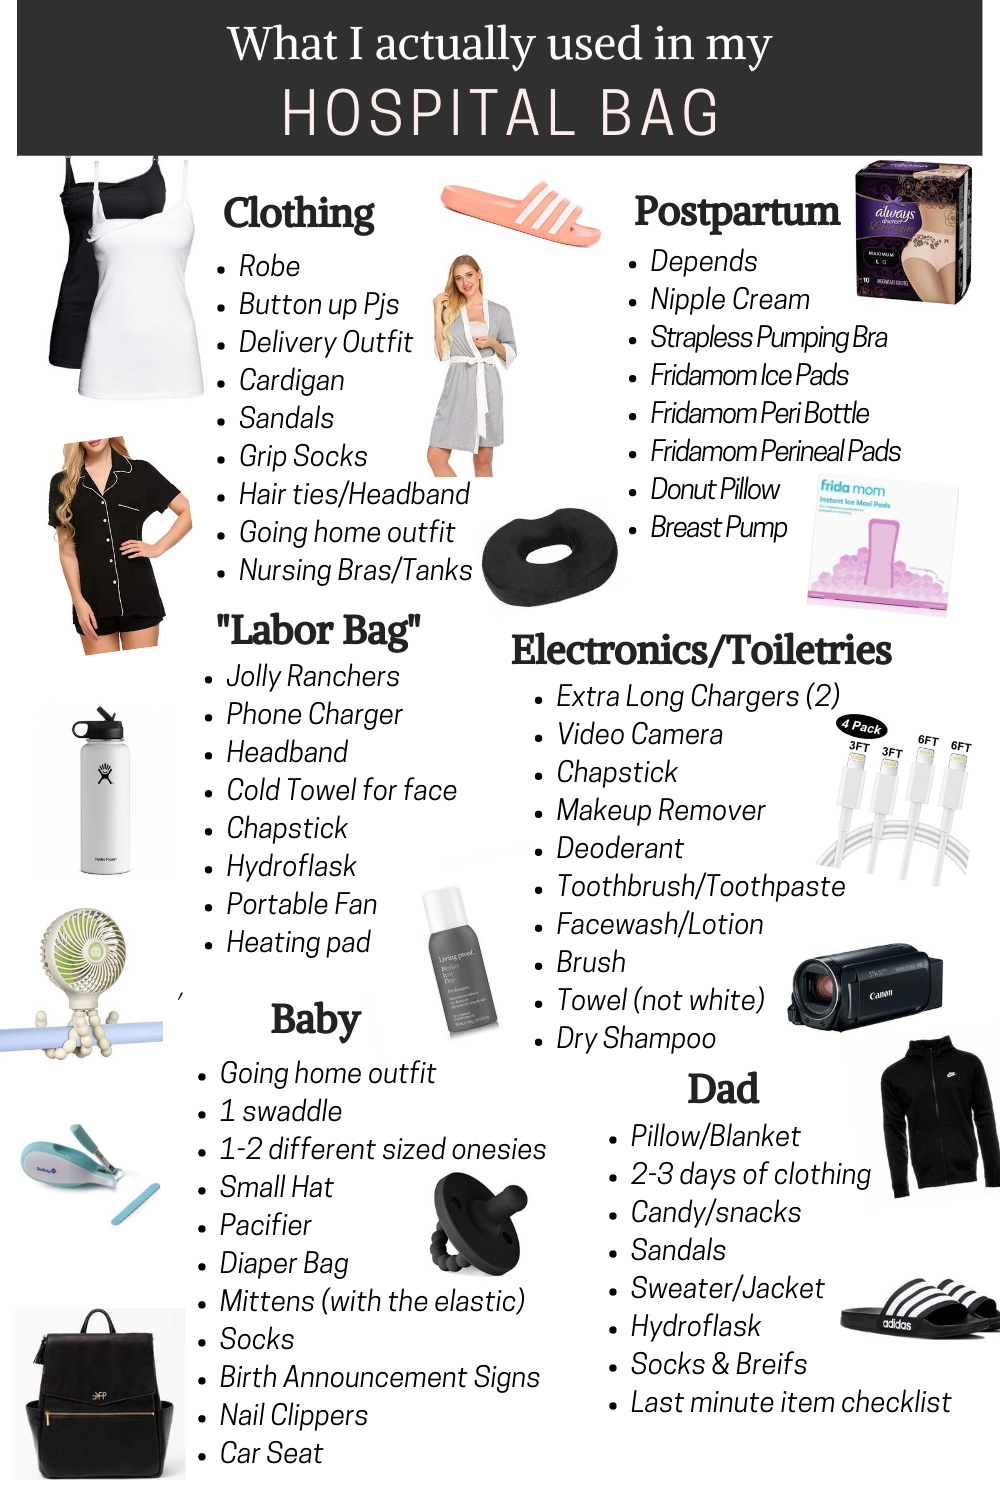 What I actually used in my hospital bag and Newborn must-haves